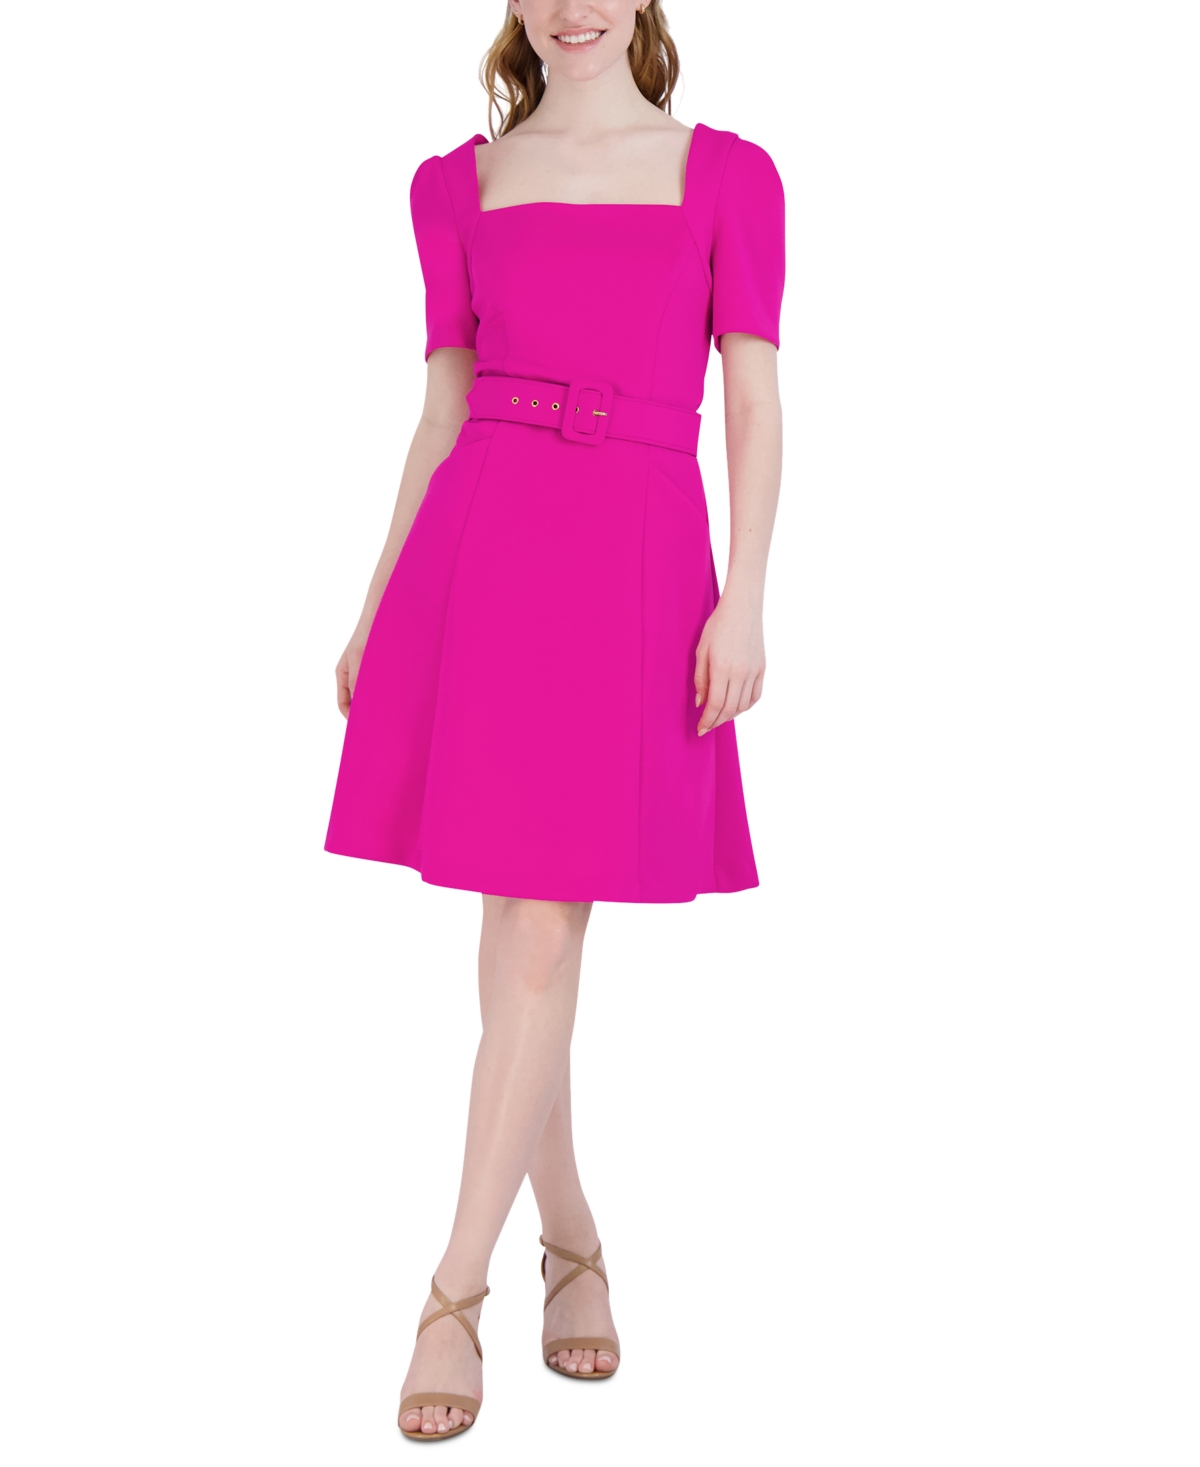 Donna Rico Women's Belted Fit & Flare Dress - Fuchsia